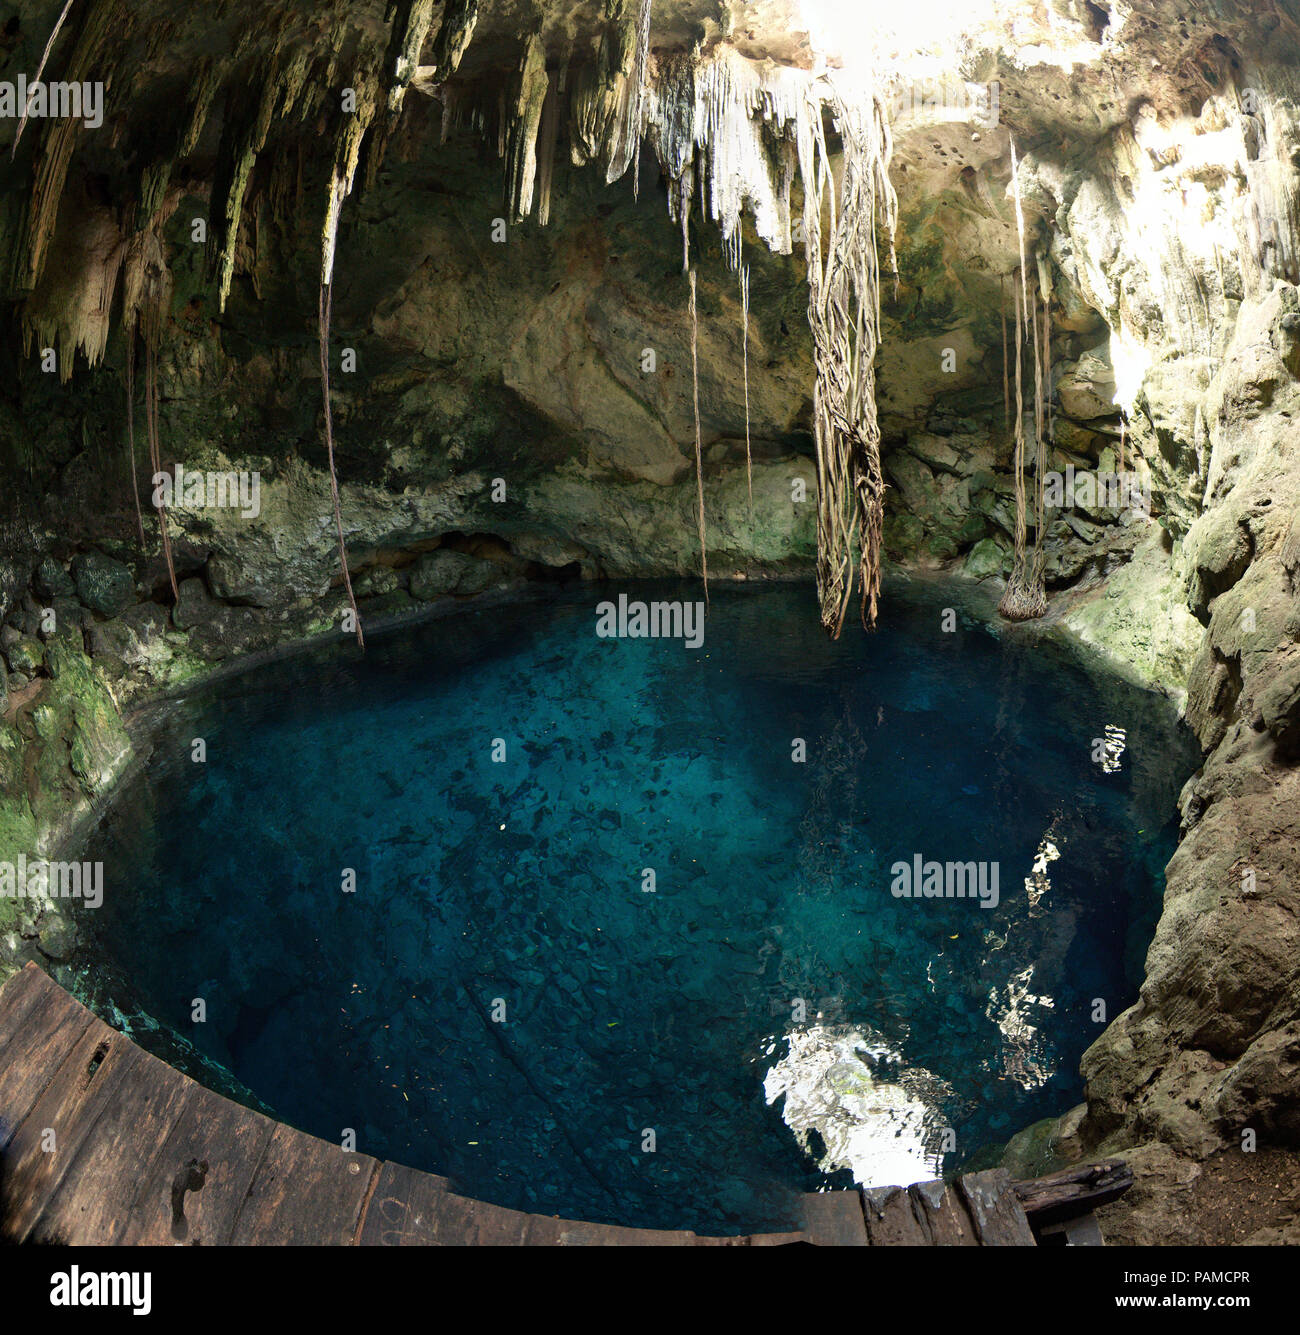 Top view of a cenote (underground river sinkhole) in Cuzamá, Yucatán, Mexico Stock Photo